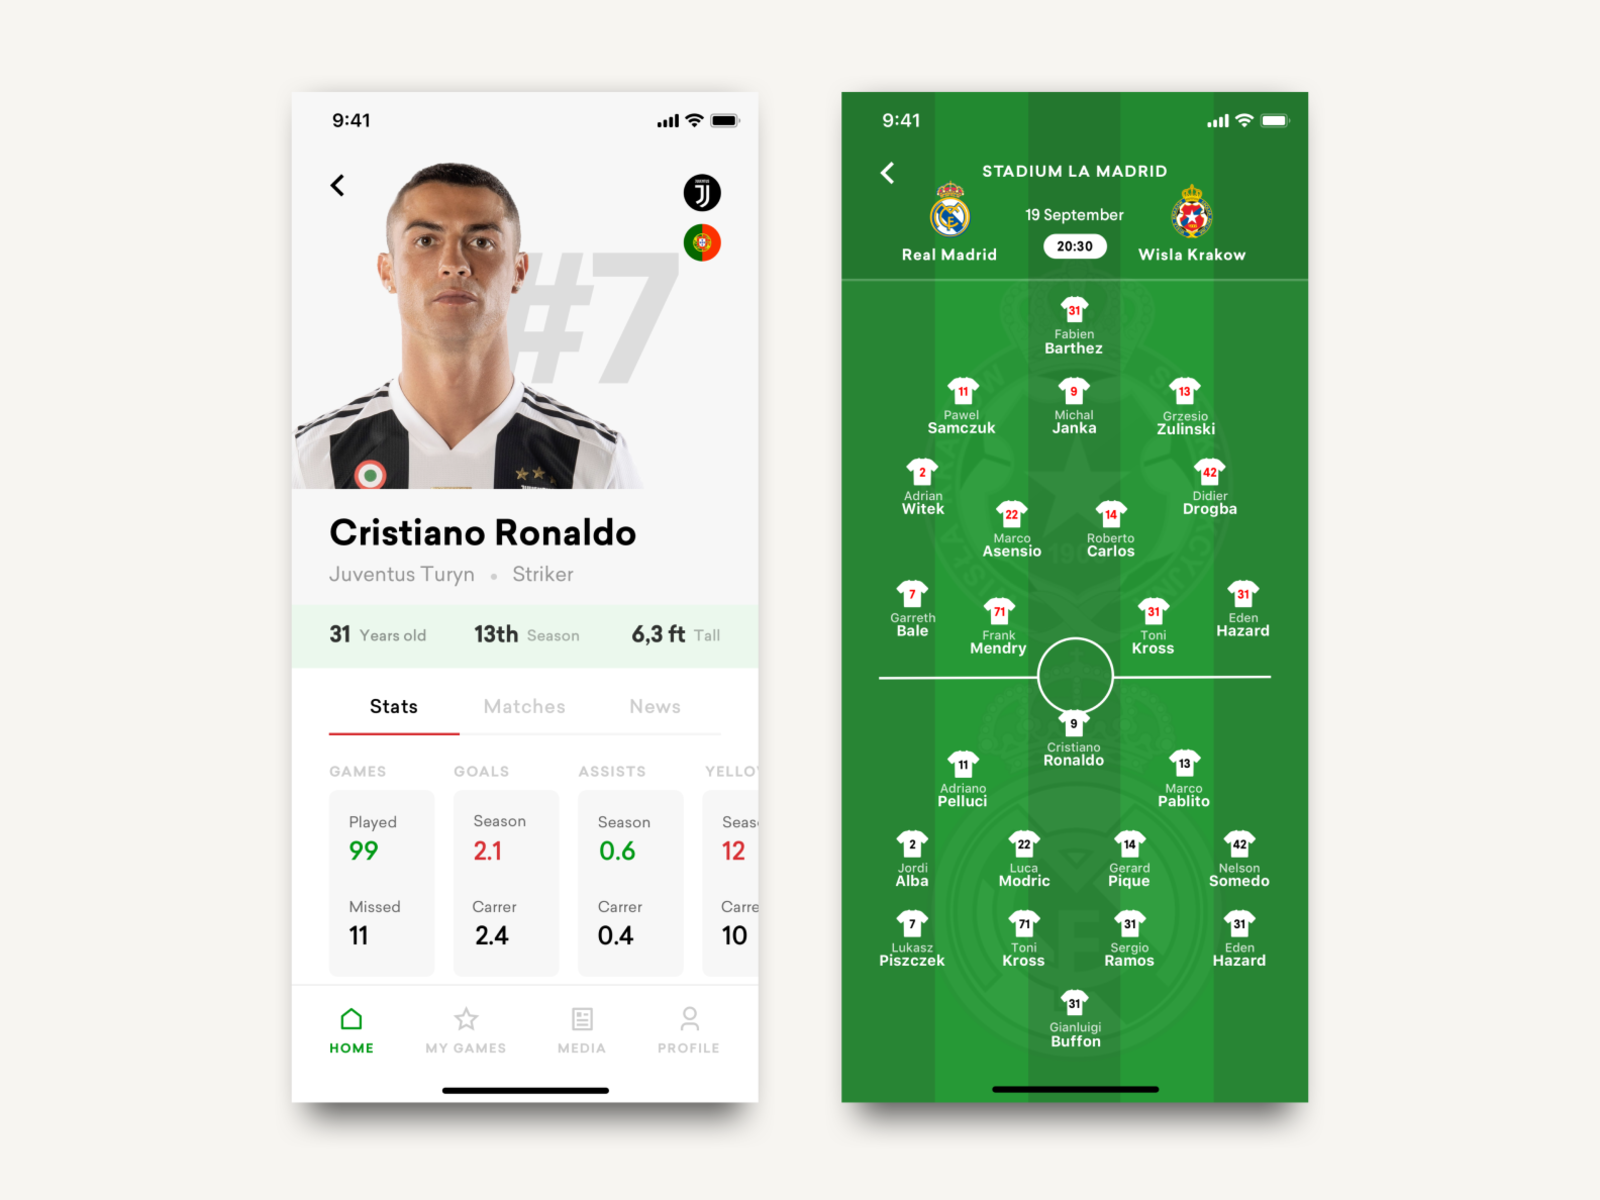 FlashScore redesign app- Profile and Squads by Bartek Gadzina on Dribbble